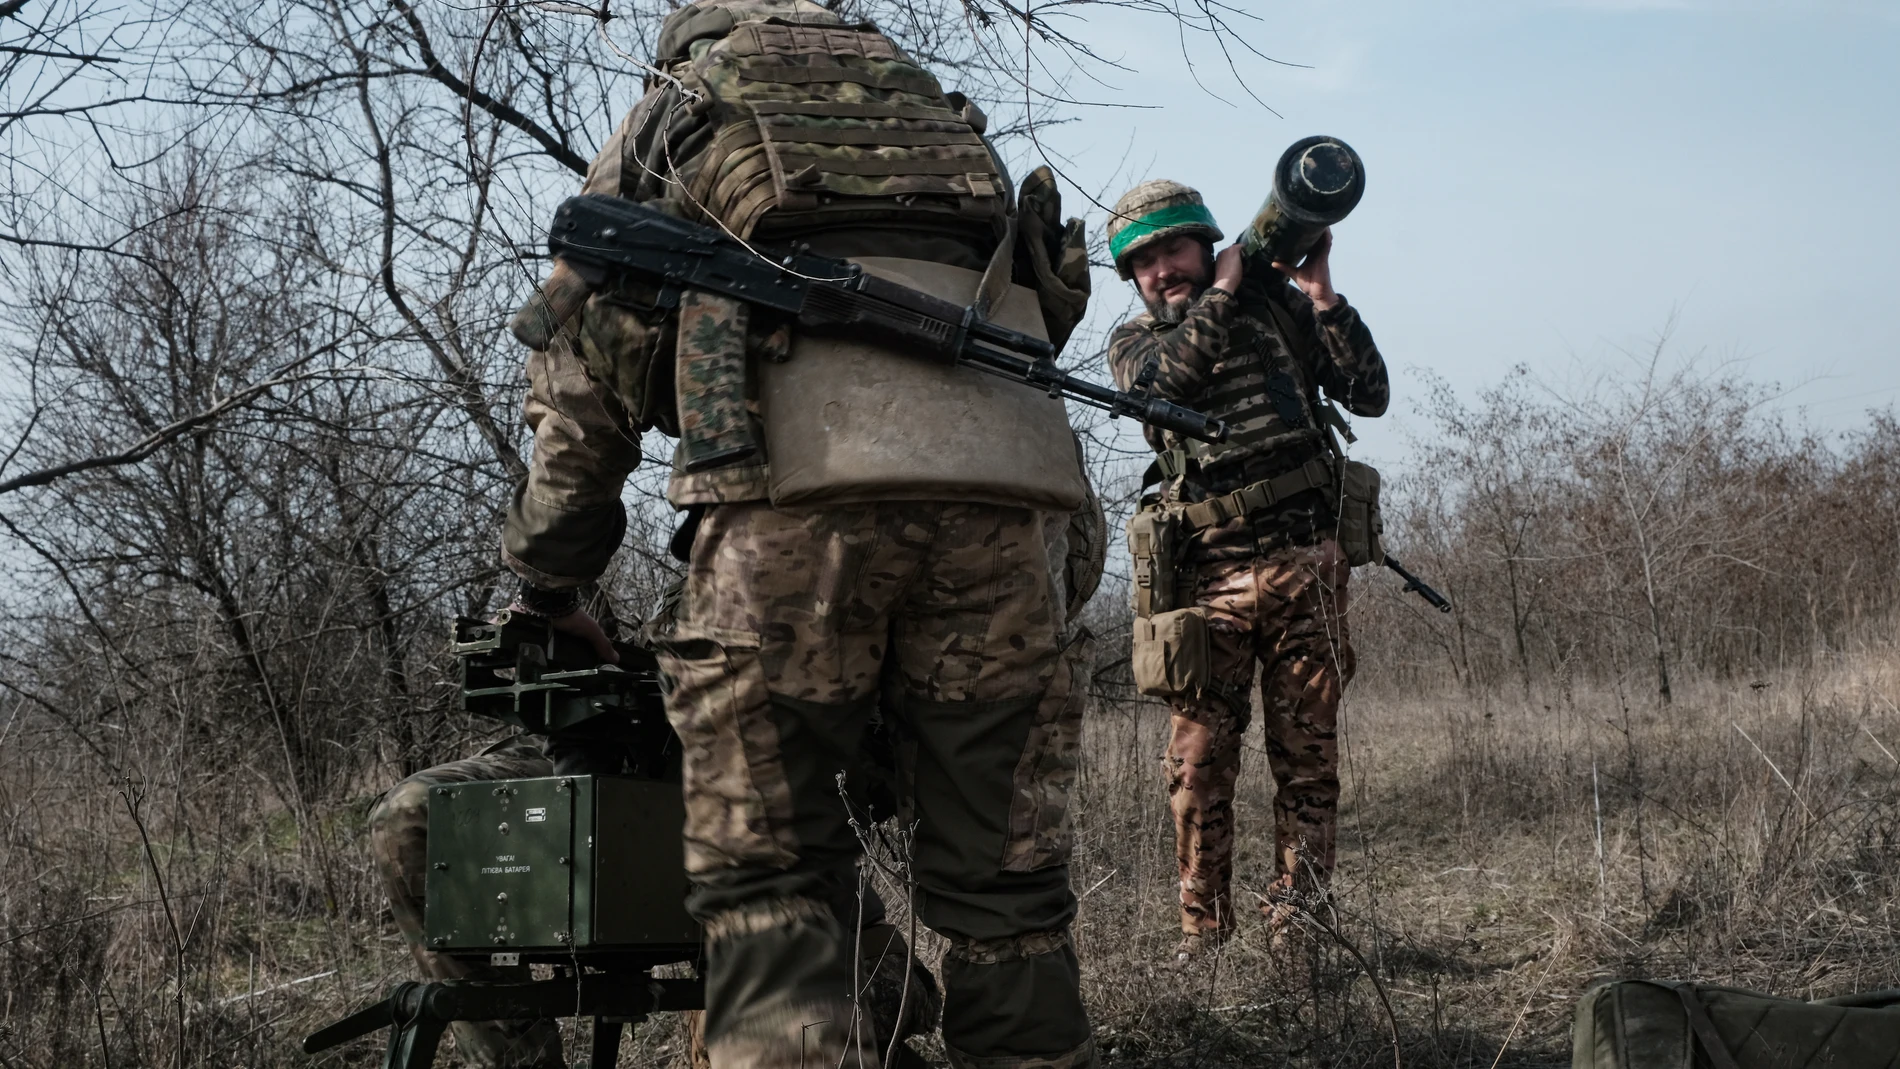 Undisclosed (Ukraine), 17/03/2023.- Members of Ukraine's Armed Forces 80th Separate Air Assault Brigade set up a position with an anti-tank guided missile (ATGM) system 'Stugna', at an undisclosed location near the frontline city of Bakhmut, eastern Ukraine, 17 March 2023, amid Russia's invasion. The frontline city of Bakhmut, a key target for Russian forces, has seen heavy fighting for months. Russian troops on 24 February 2022, entered Ukrainian territory, starting a conflict that has provoked destruction and a humanitarian crisis. (Rusia, Ucrania) EFE/EPA/MARIA SENOVILLA
